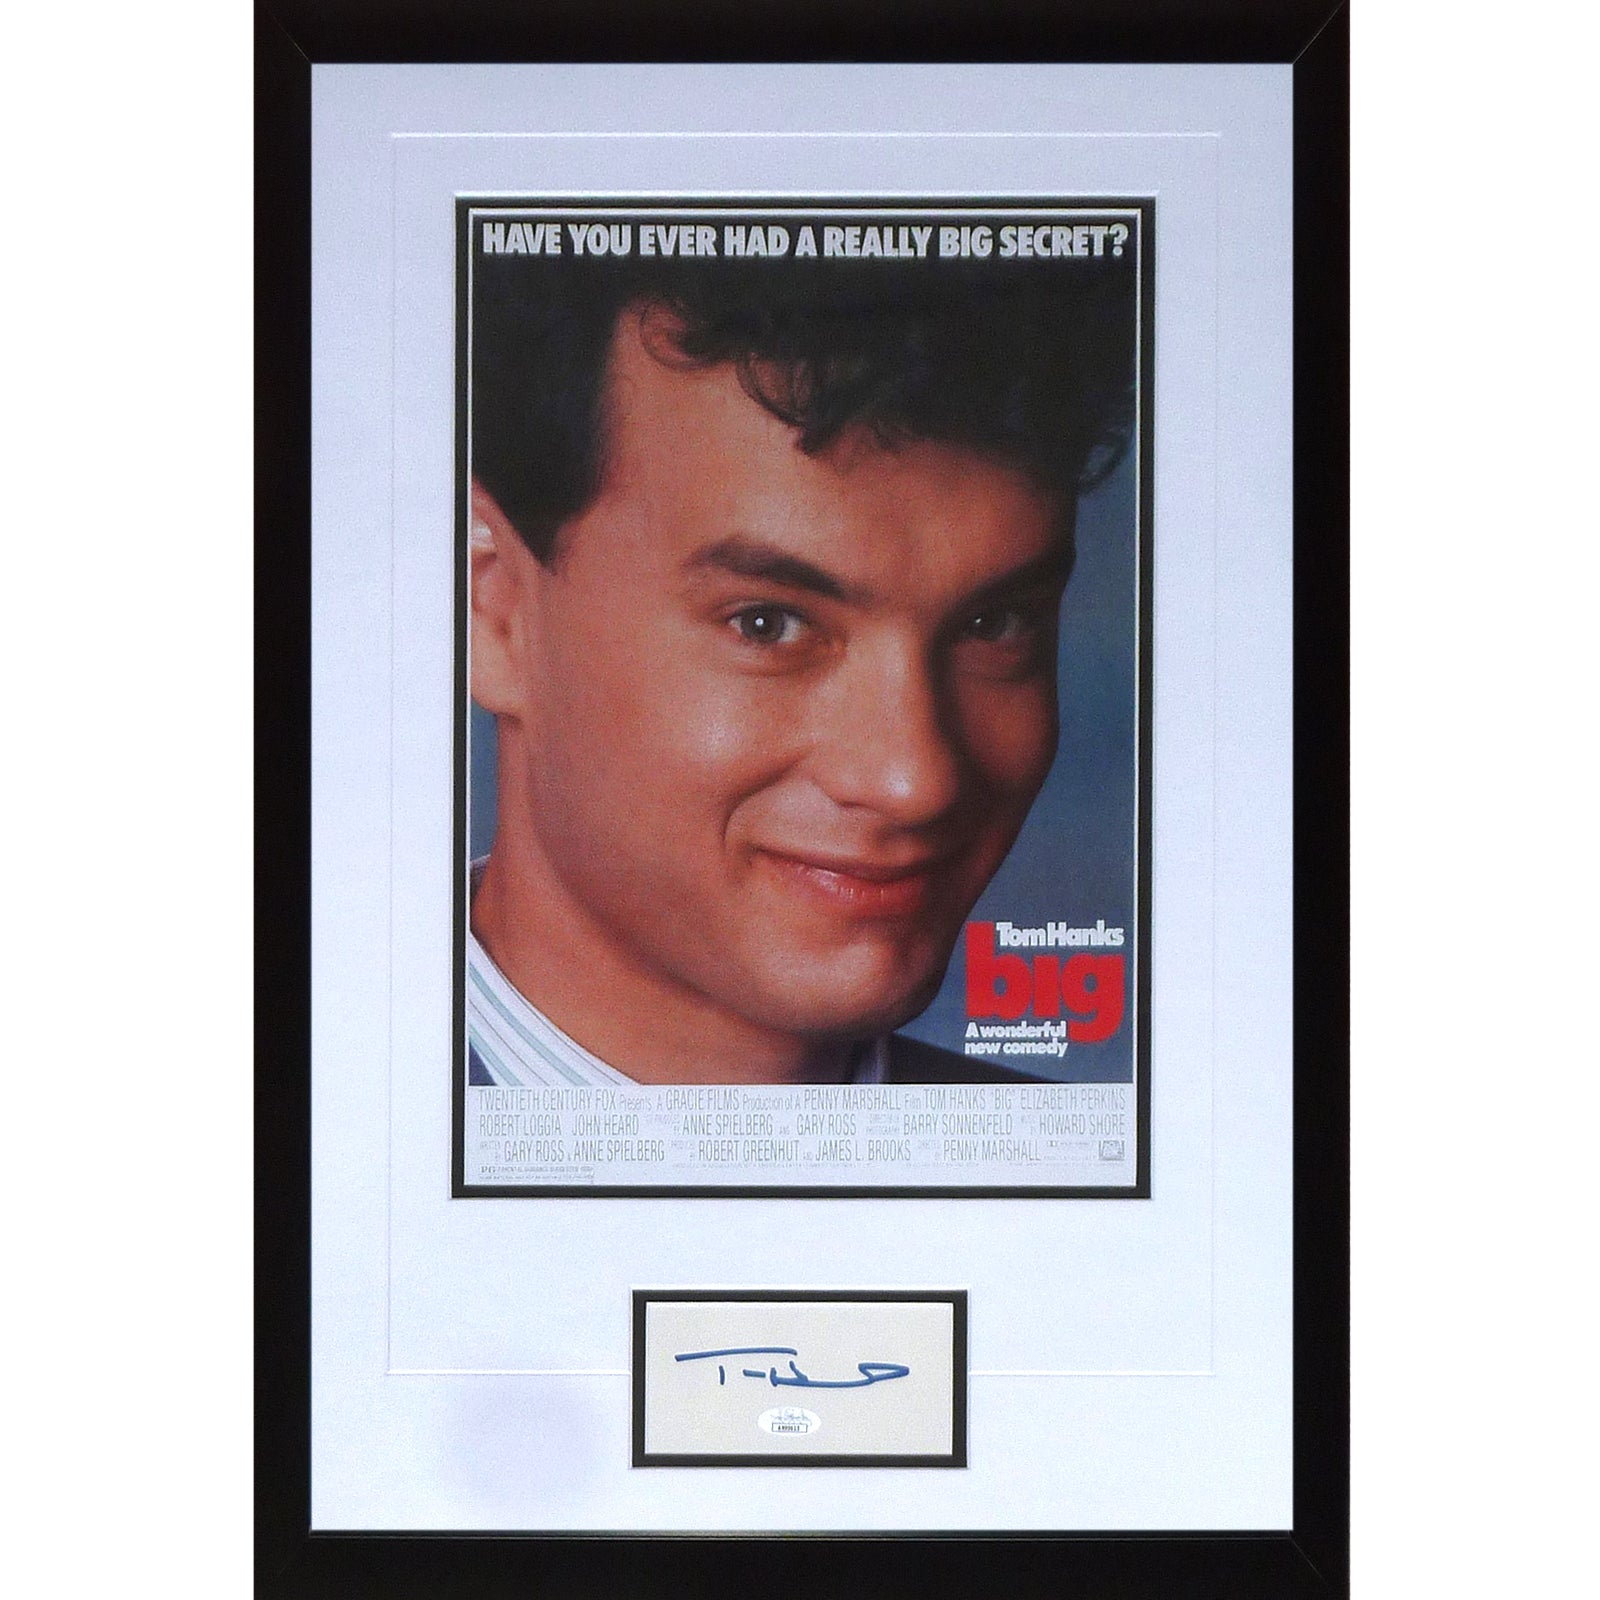 Big 11x17 Movie Poster Deluxe Framed with Tom Hanks Autograph - JSA